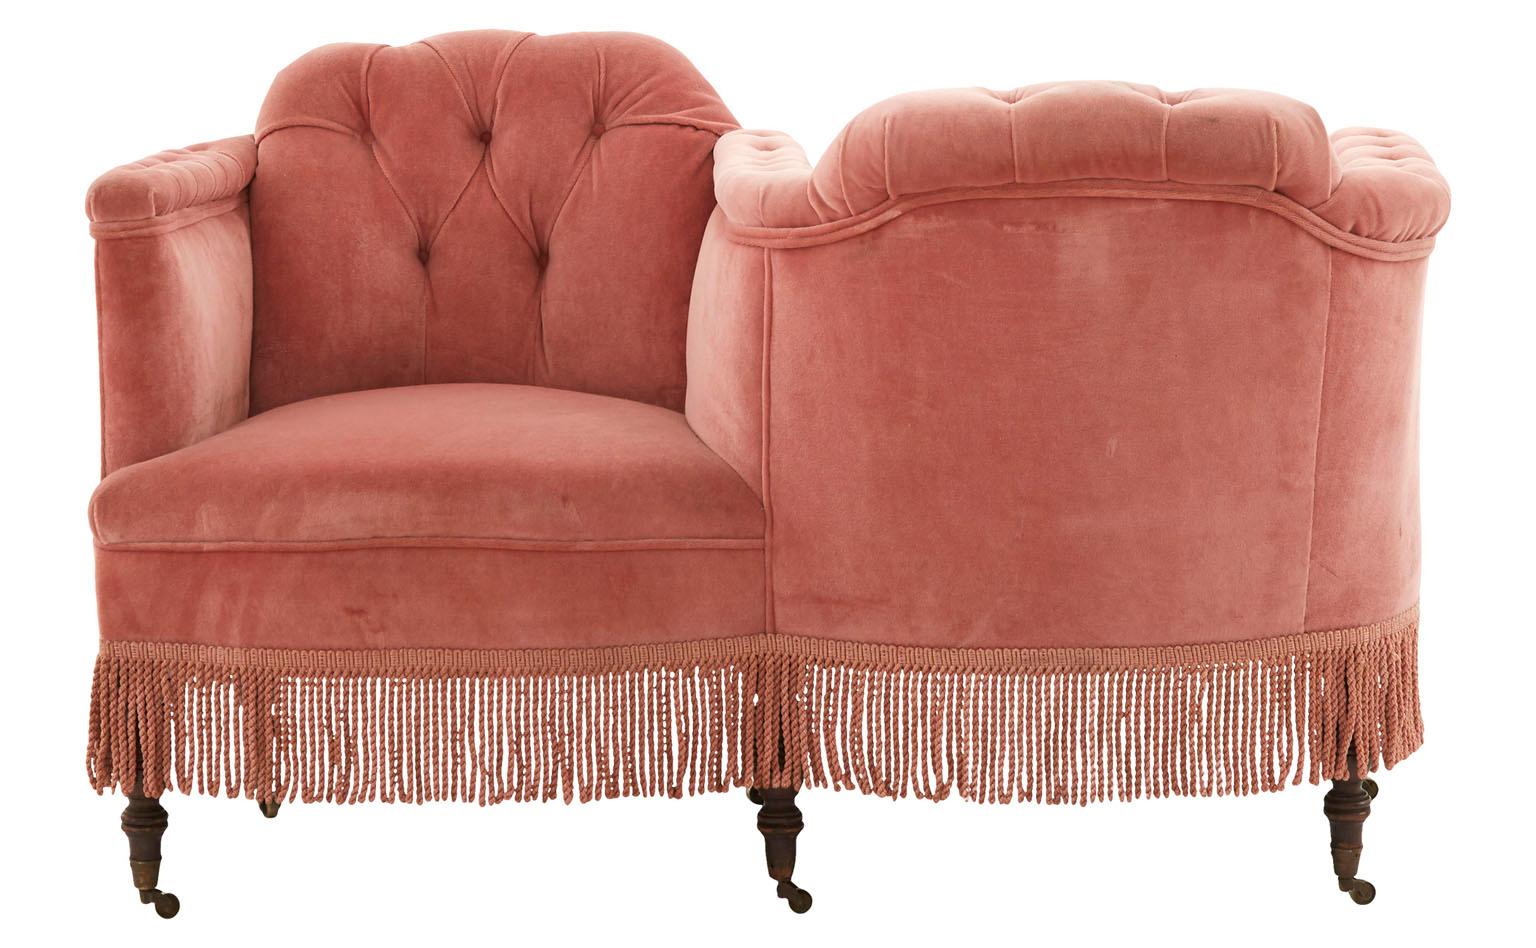 Named for the French for “face to face,” our Vintage Tête-à-Tête was made in America in the mid-20th century. This unconventional S-shaped seat features its original pink velvet upholstery, lightly worn with some markings. It’s paired with neat